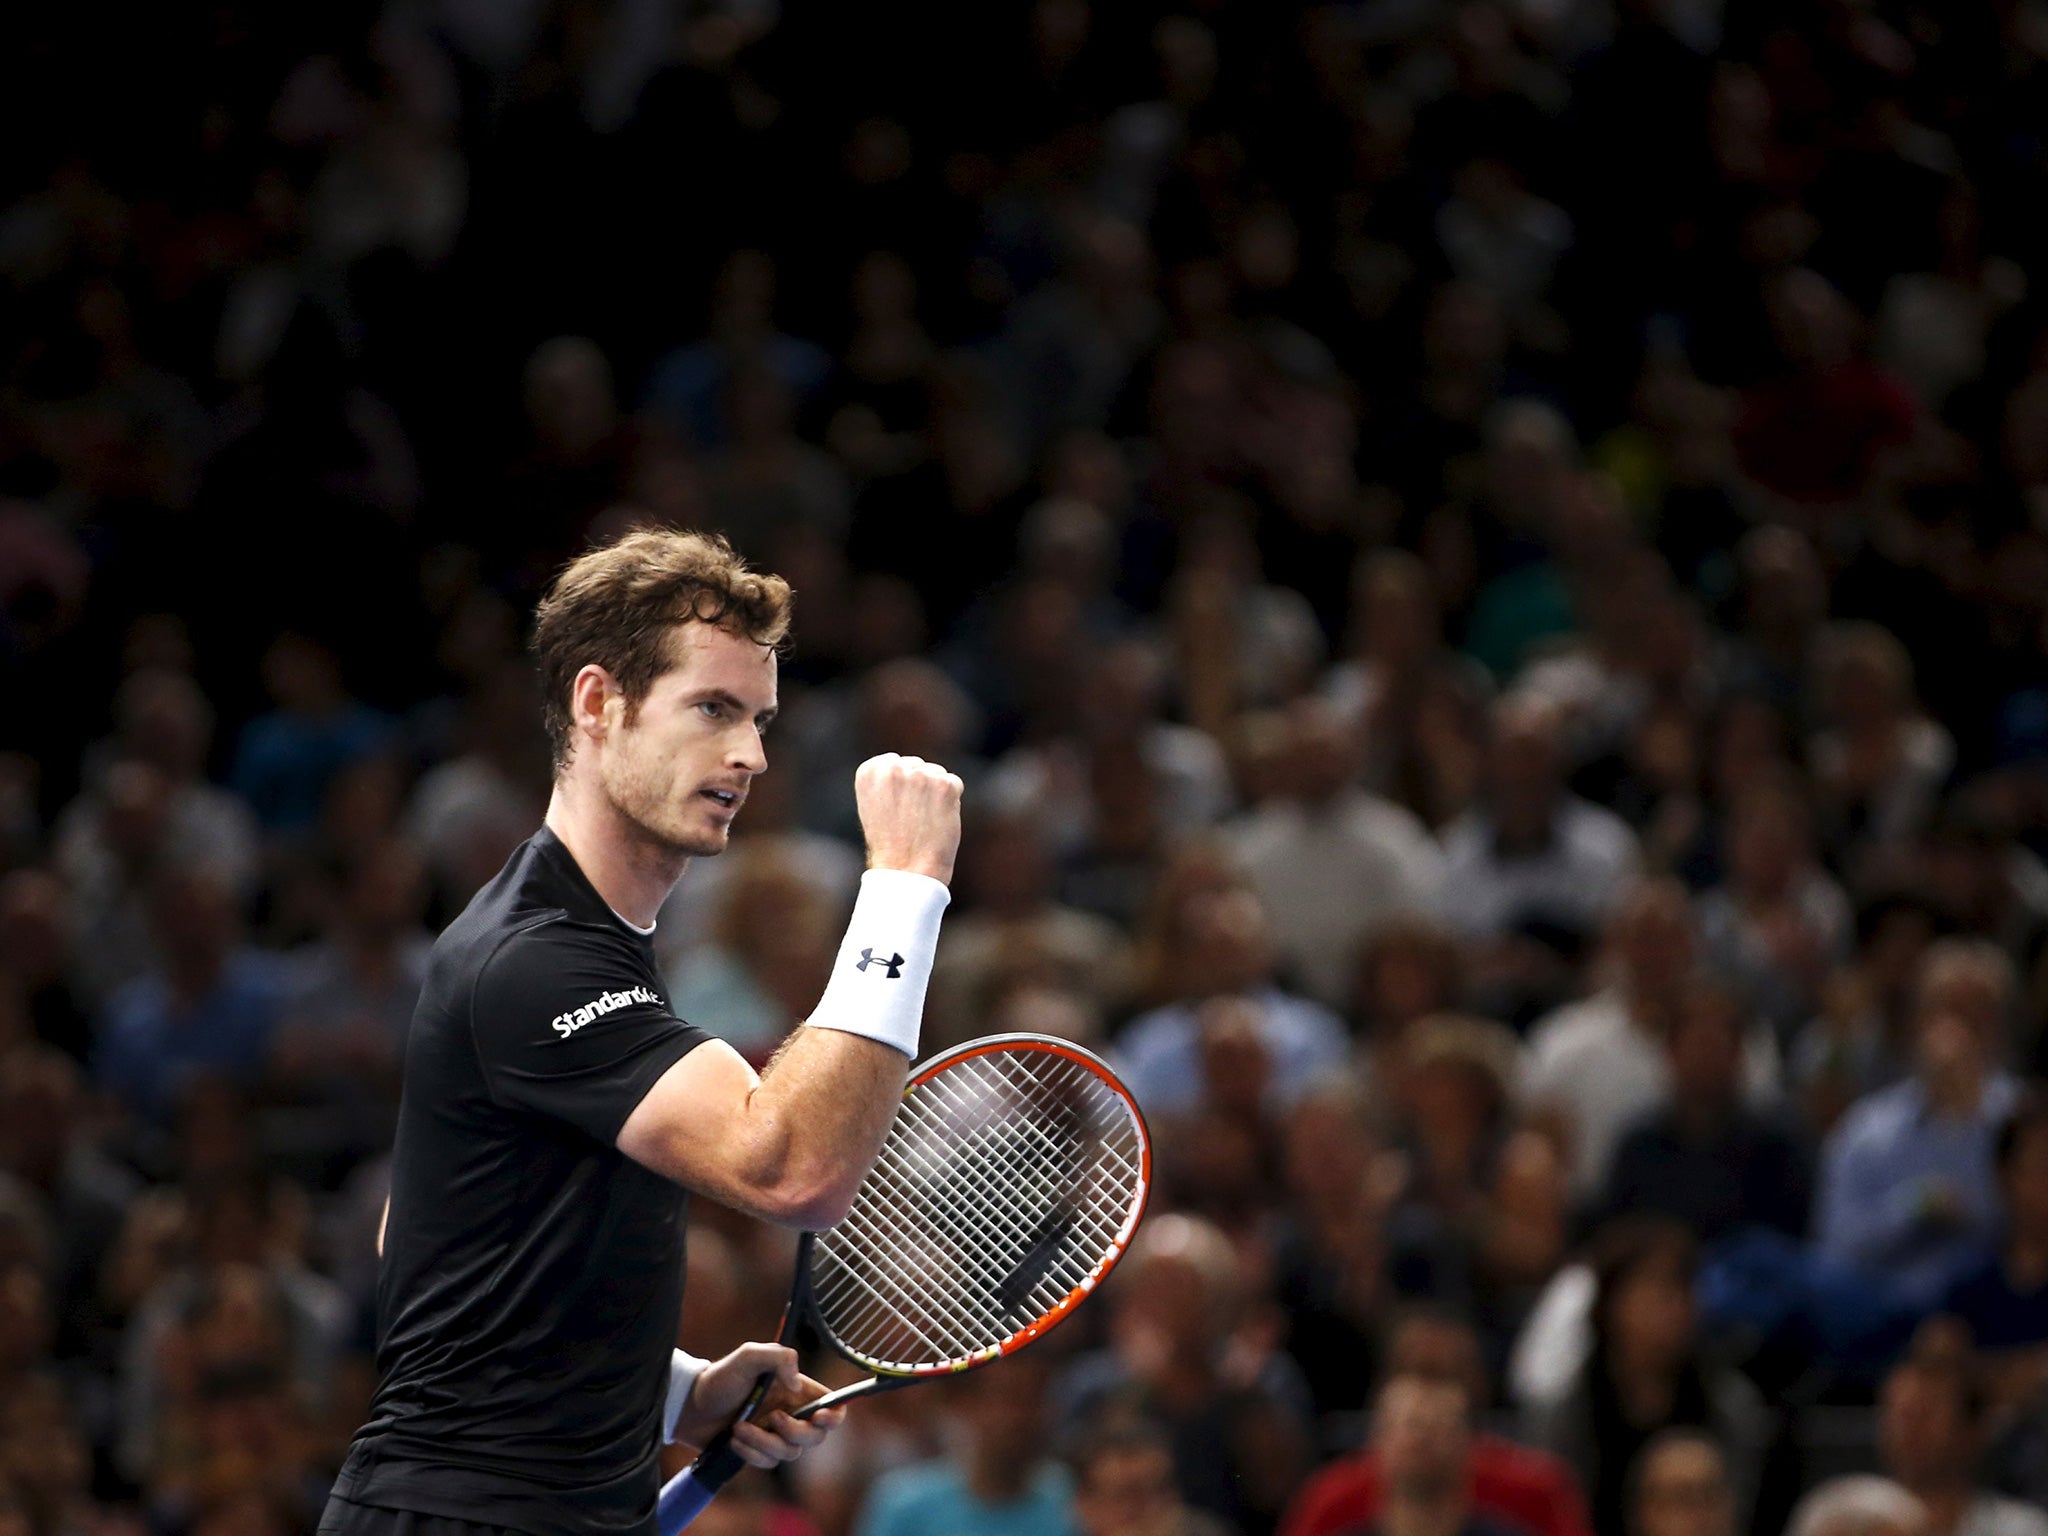 Andy Murray will play Novak Djokovic in the final of the Paris Masters